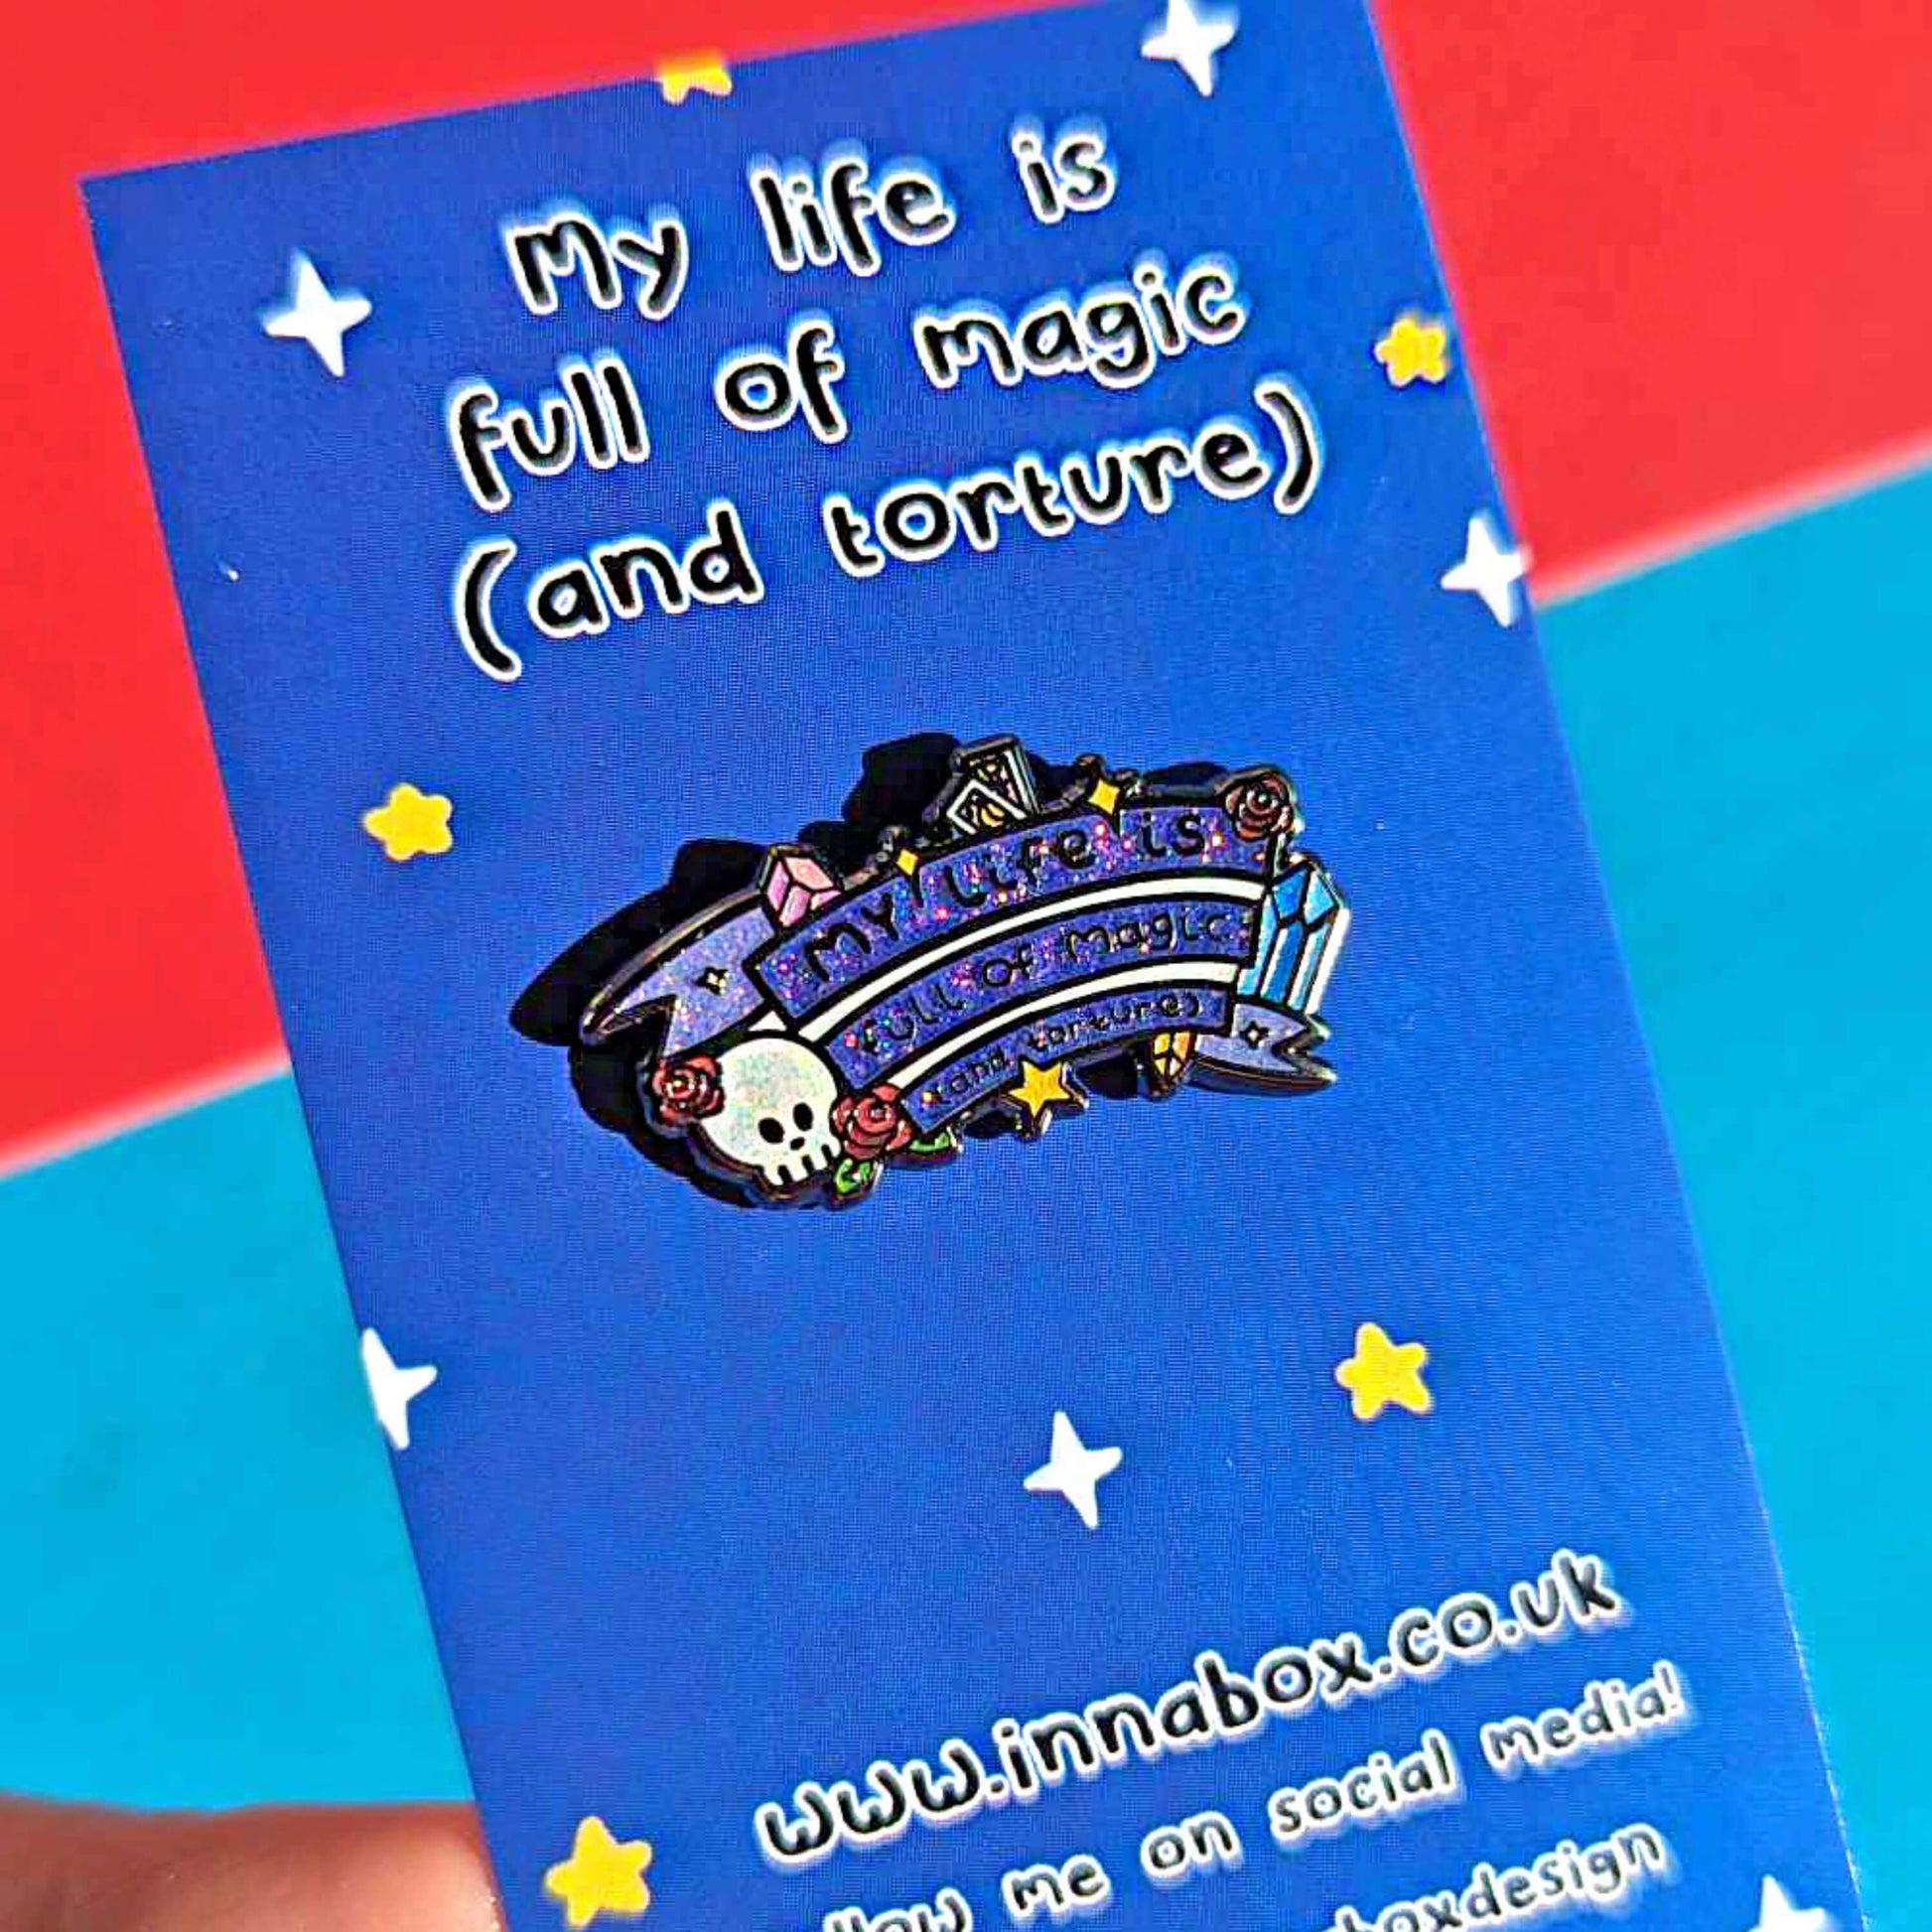 The My Life is Full of Magic & Torture Glitter Enamel Pin on blue starry backing card with the innabox social media handles at the bottom held over a red and blue background. The glittery finish enamel pin badge features a purple banner sash of black text reading 'my life is full of magic (and torture)' with yellow sparkles, crystals, red roses, tarot cards and a skull head.